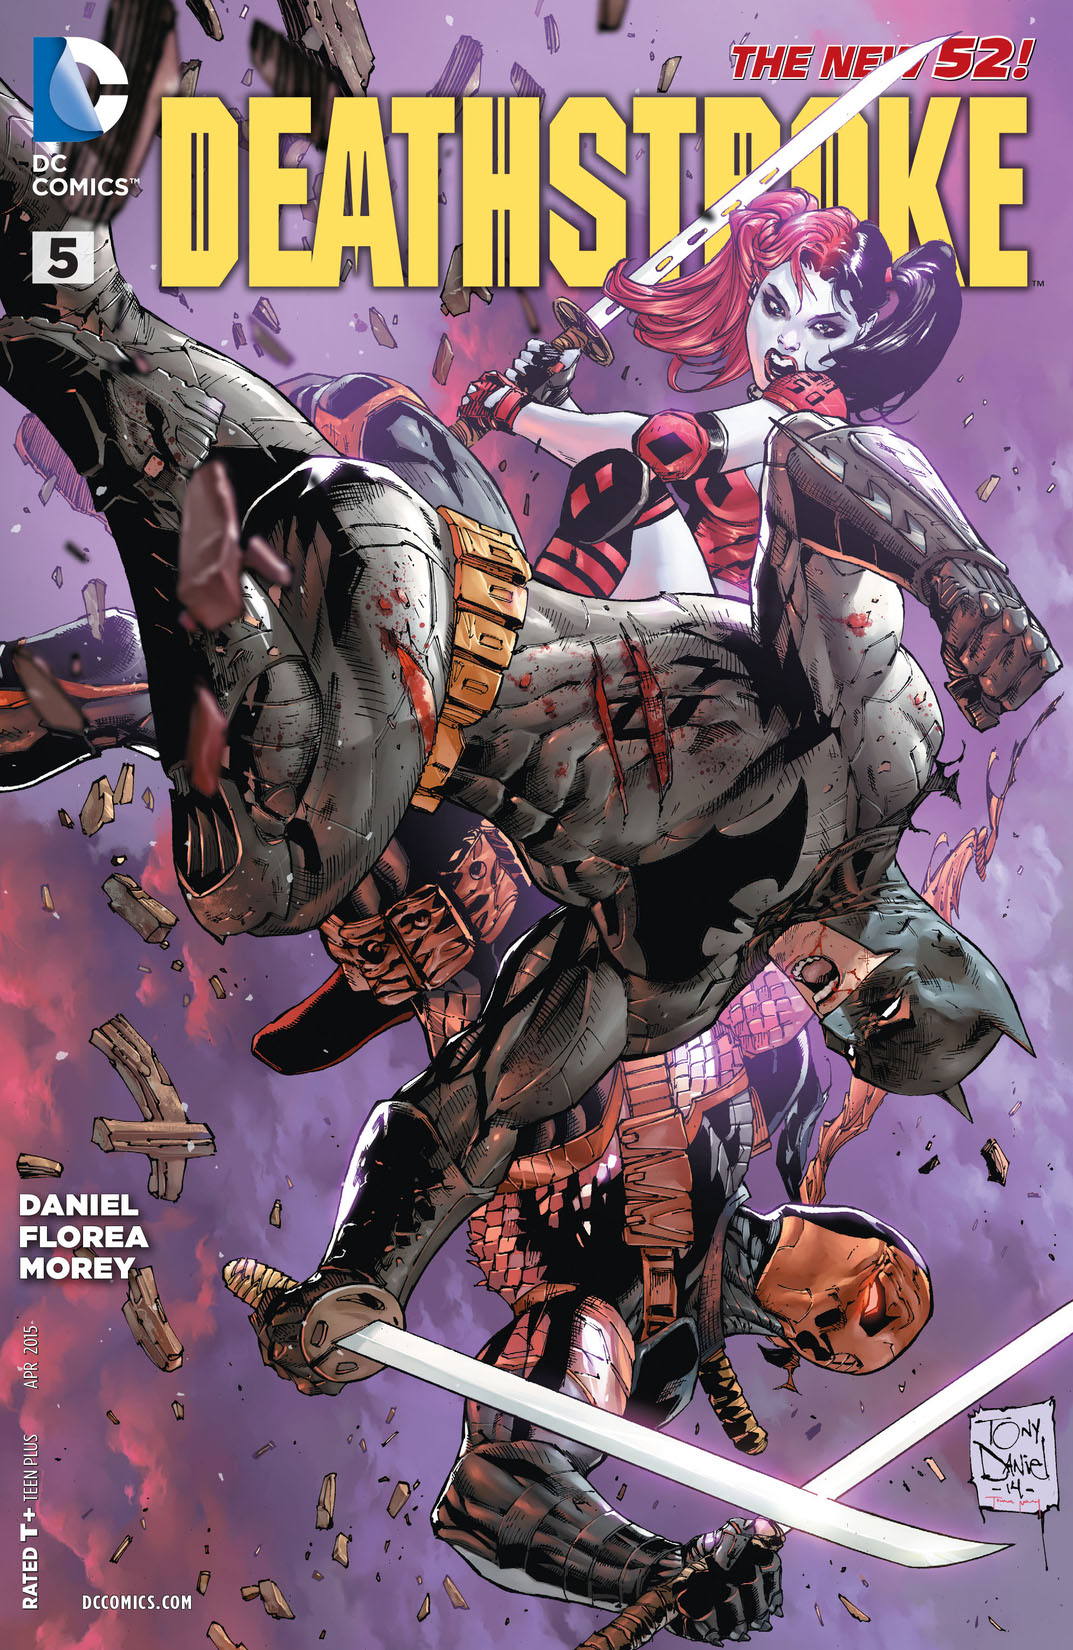 Deathstroke (2014-) #5 preview images